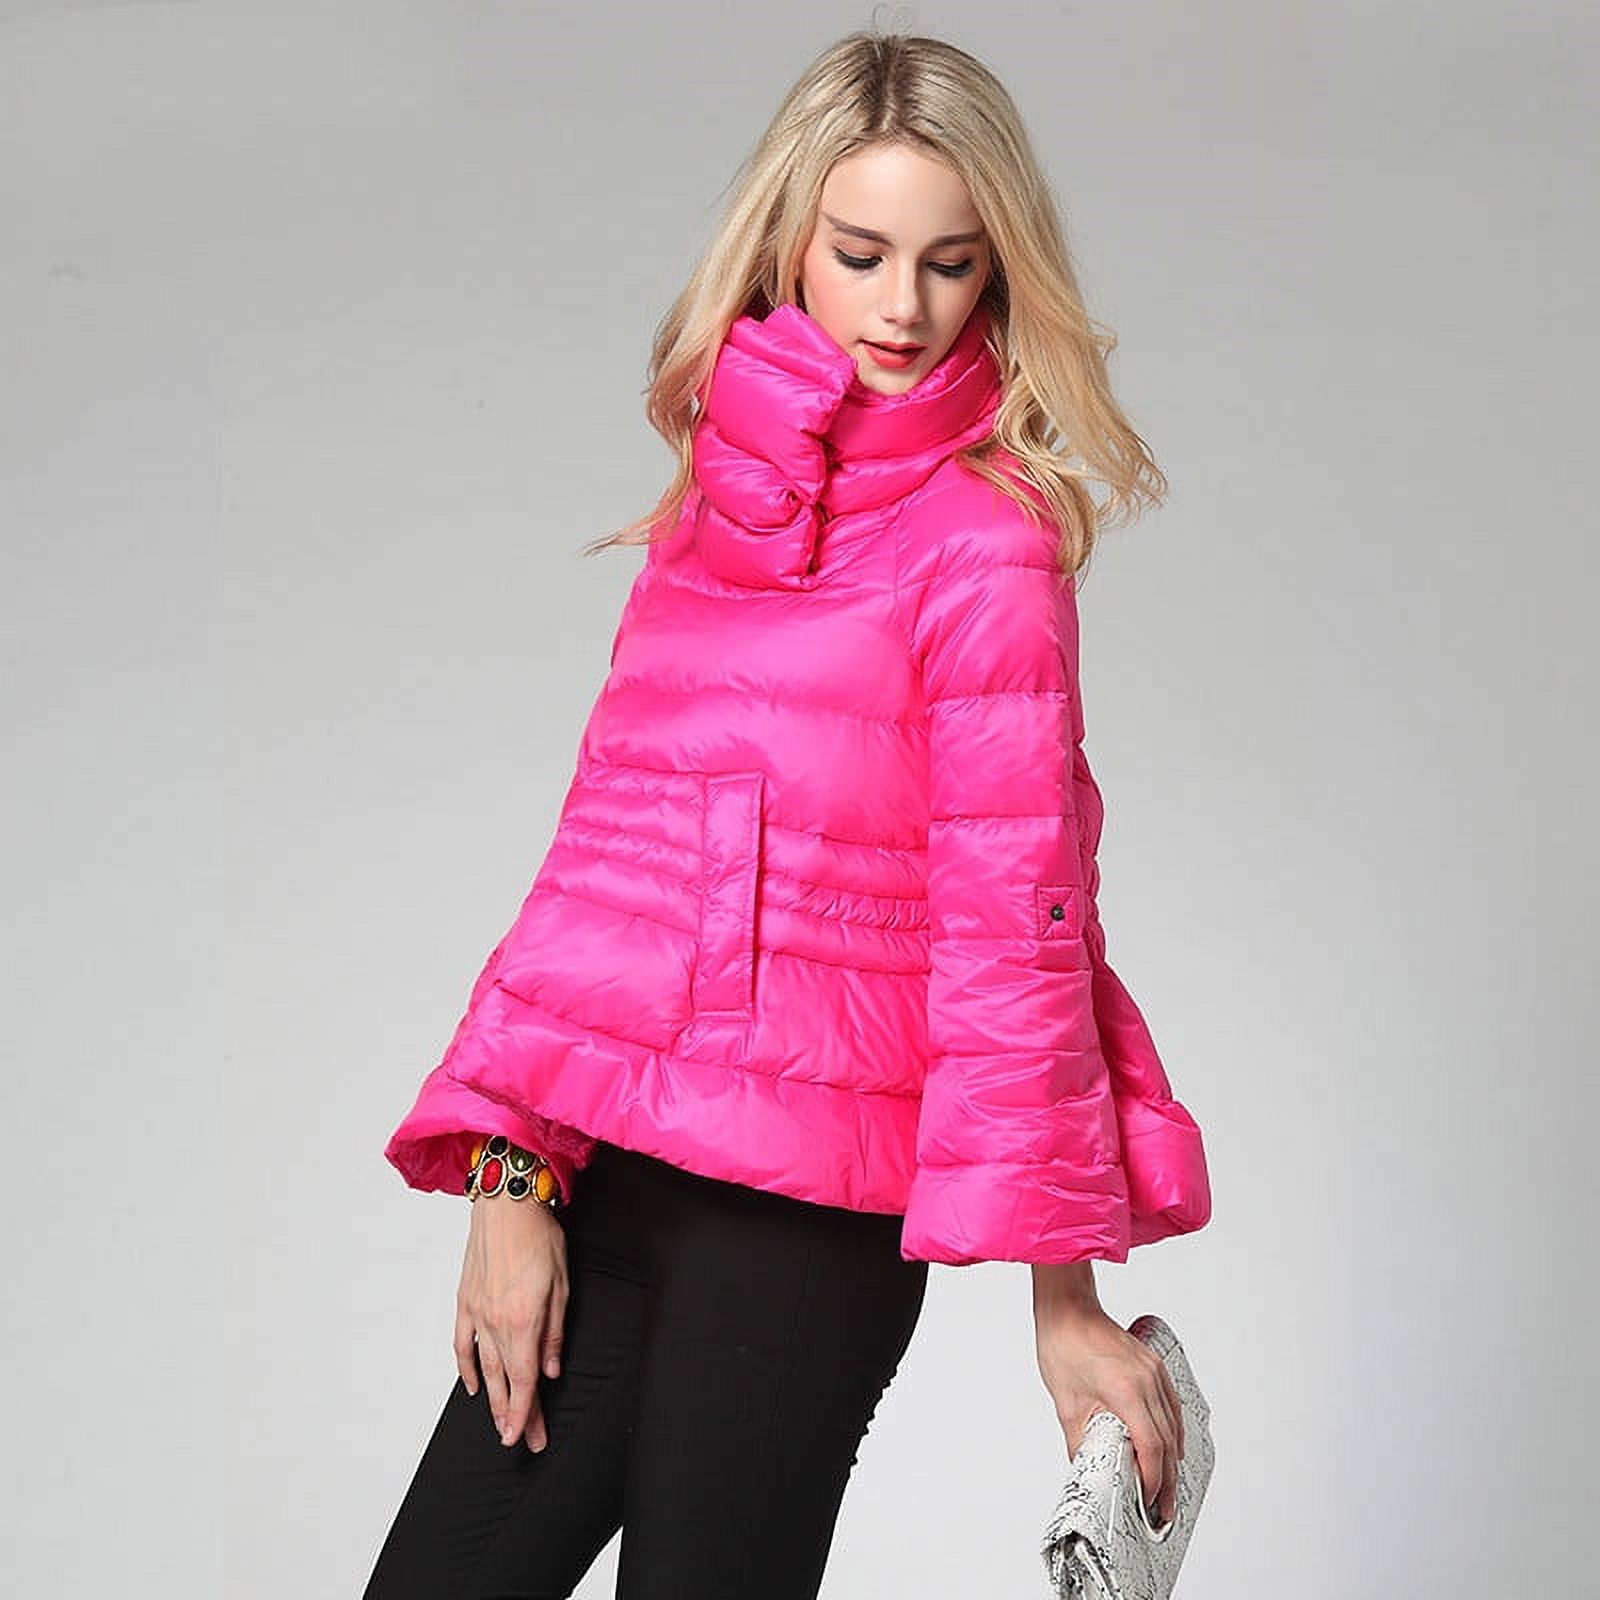 Toyella Down Jacket Women's Winter Fashion White Duck Down A- Line Plus Size Lightweight Thermal Turtleneck Down Jacket One Piece Dropshipping Rose Red S - image 1 of 7